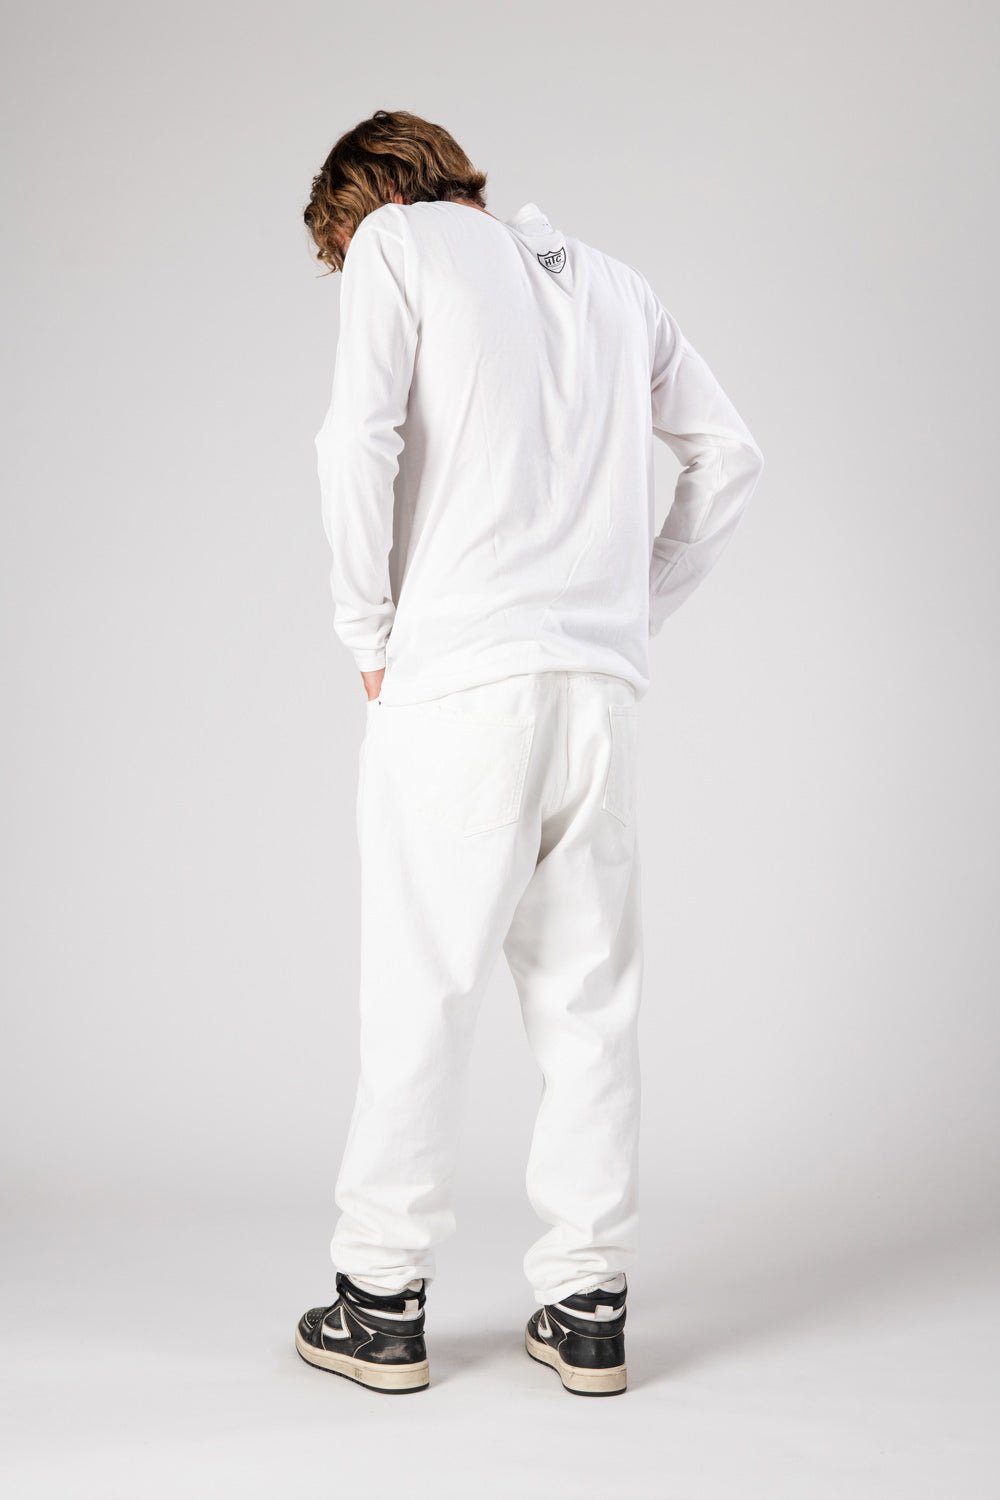 LOOSE WHITE Loose fit jeans, 5 pockets, hidden front button closure. 100% cotton. Made in Italy. HTC LOS ANGELES